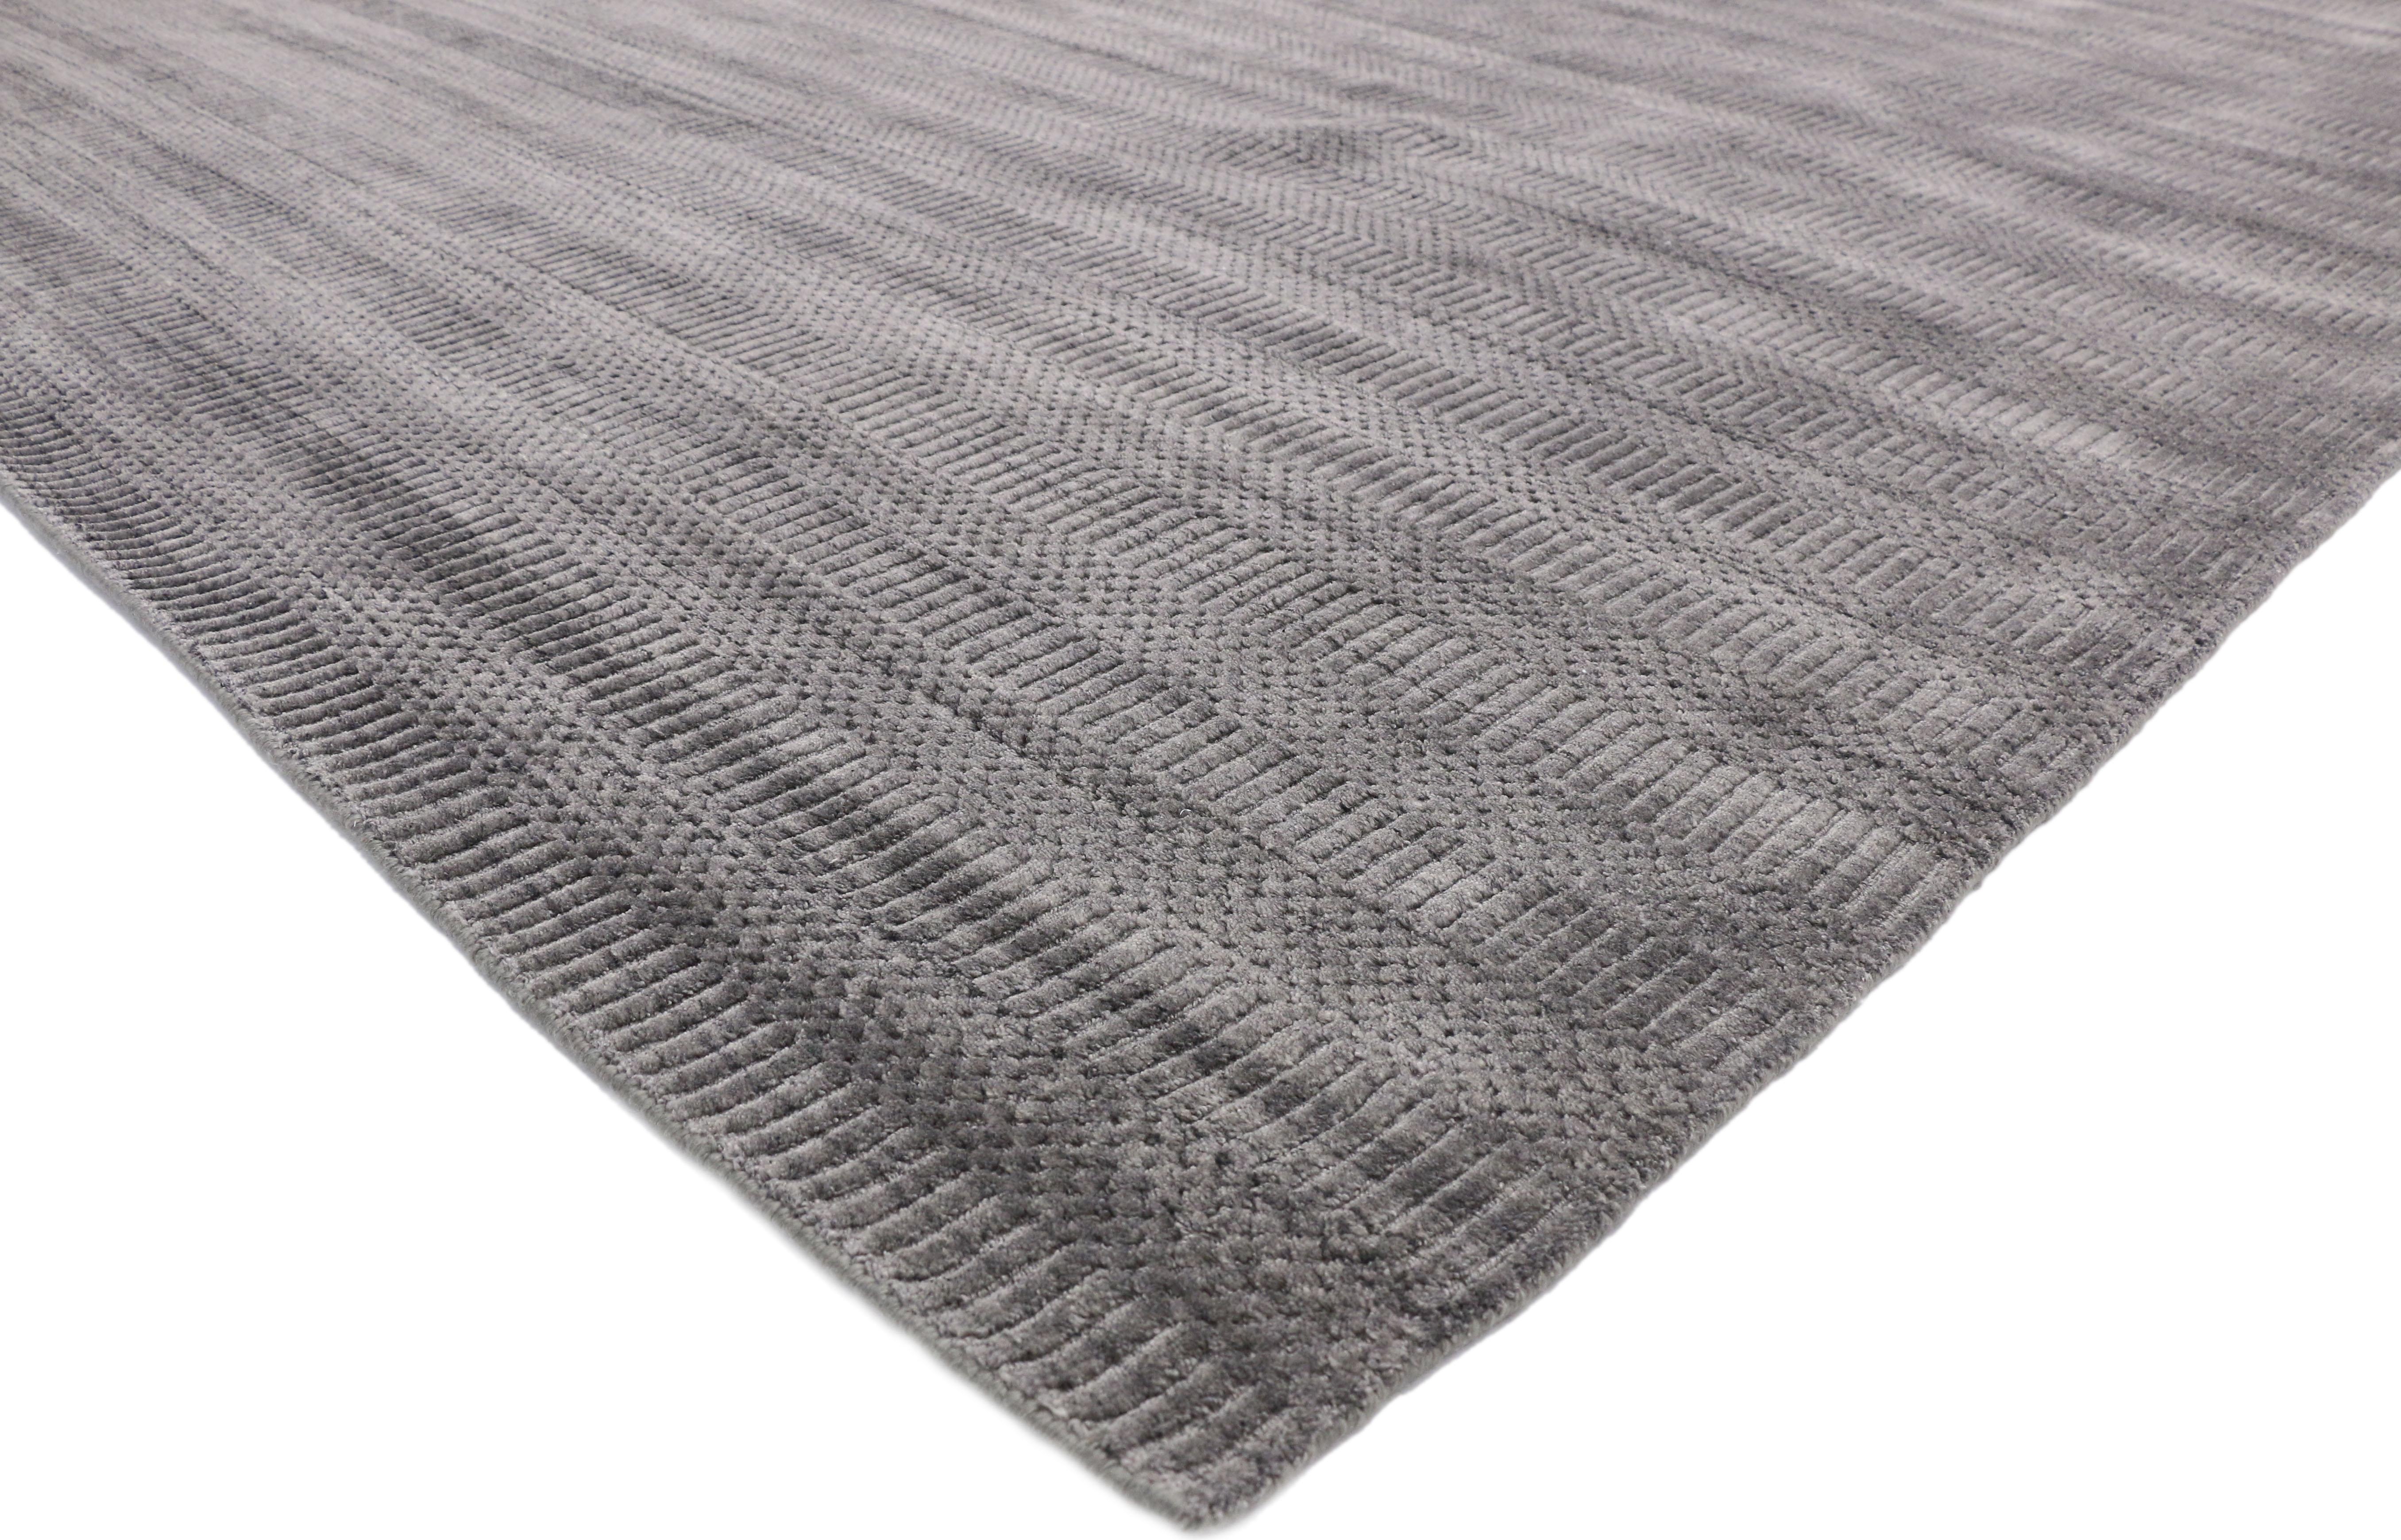 30451 transitional Nordic gray area rug with modern Scandinavian style. This gray midcentury Style carpet emanates function and versatility with high style. Midcentury vibes meet Scandinavian design in this transitional gray area rug. The all-over